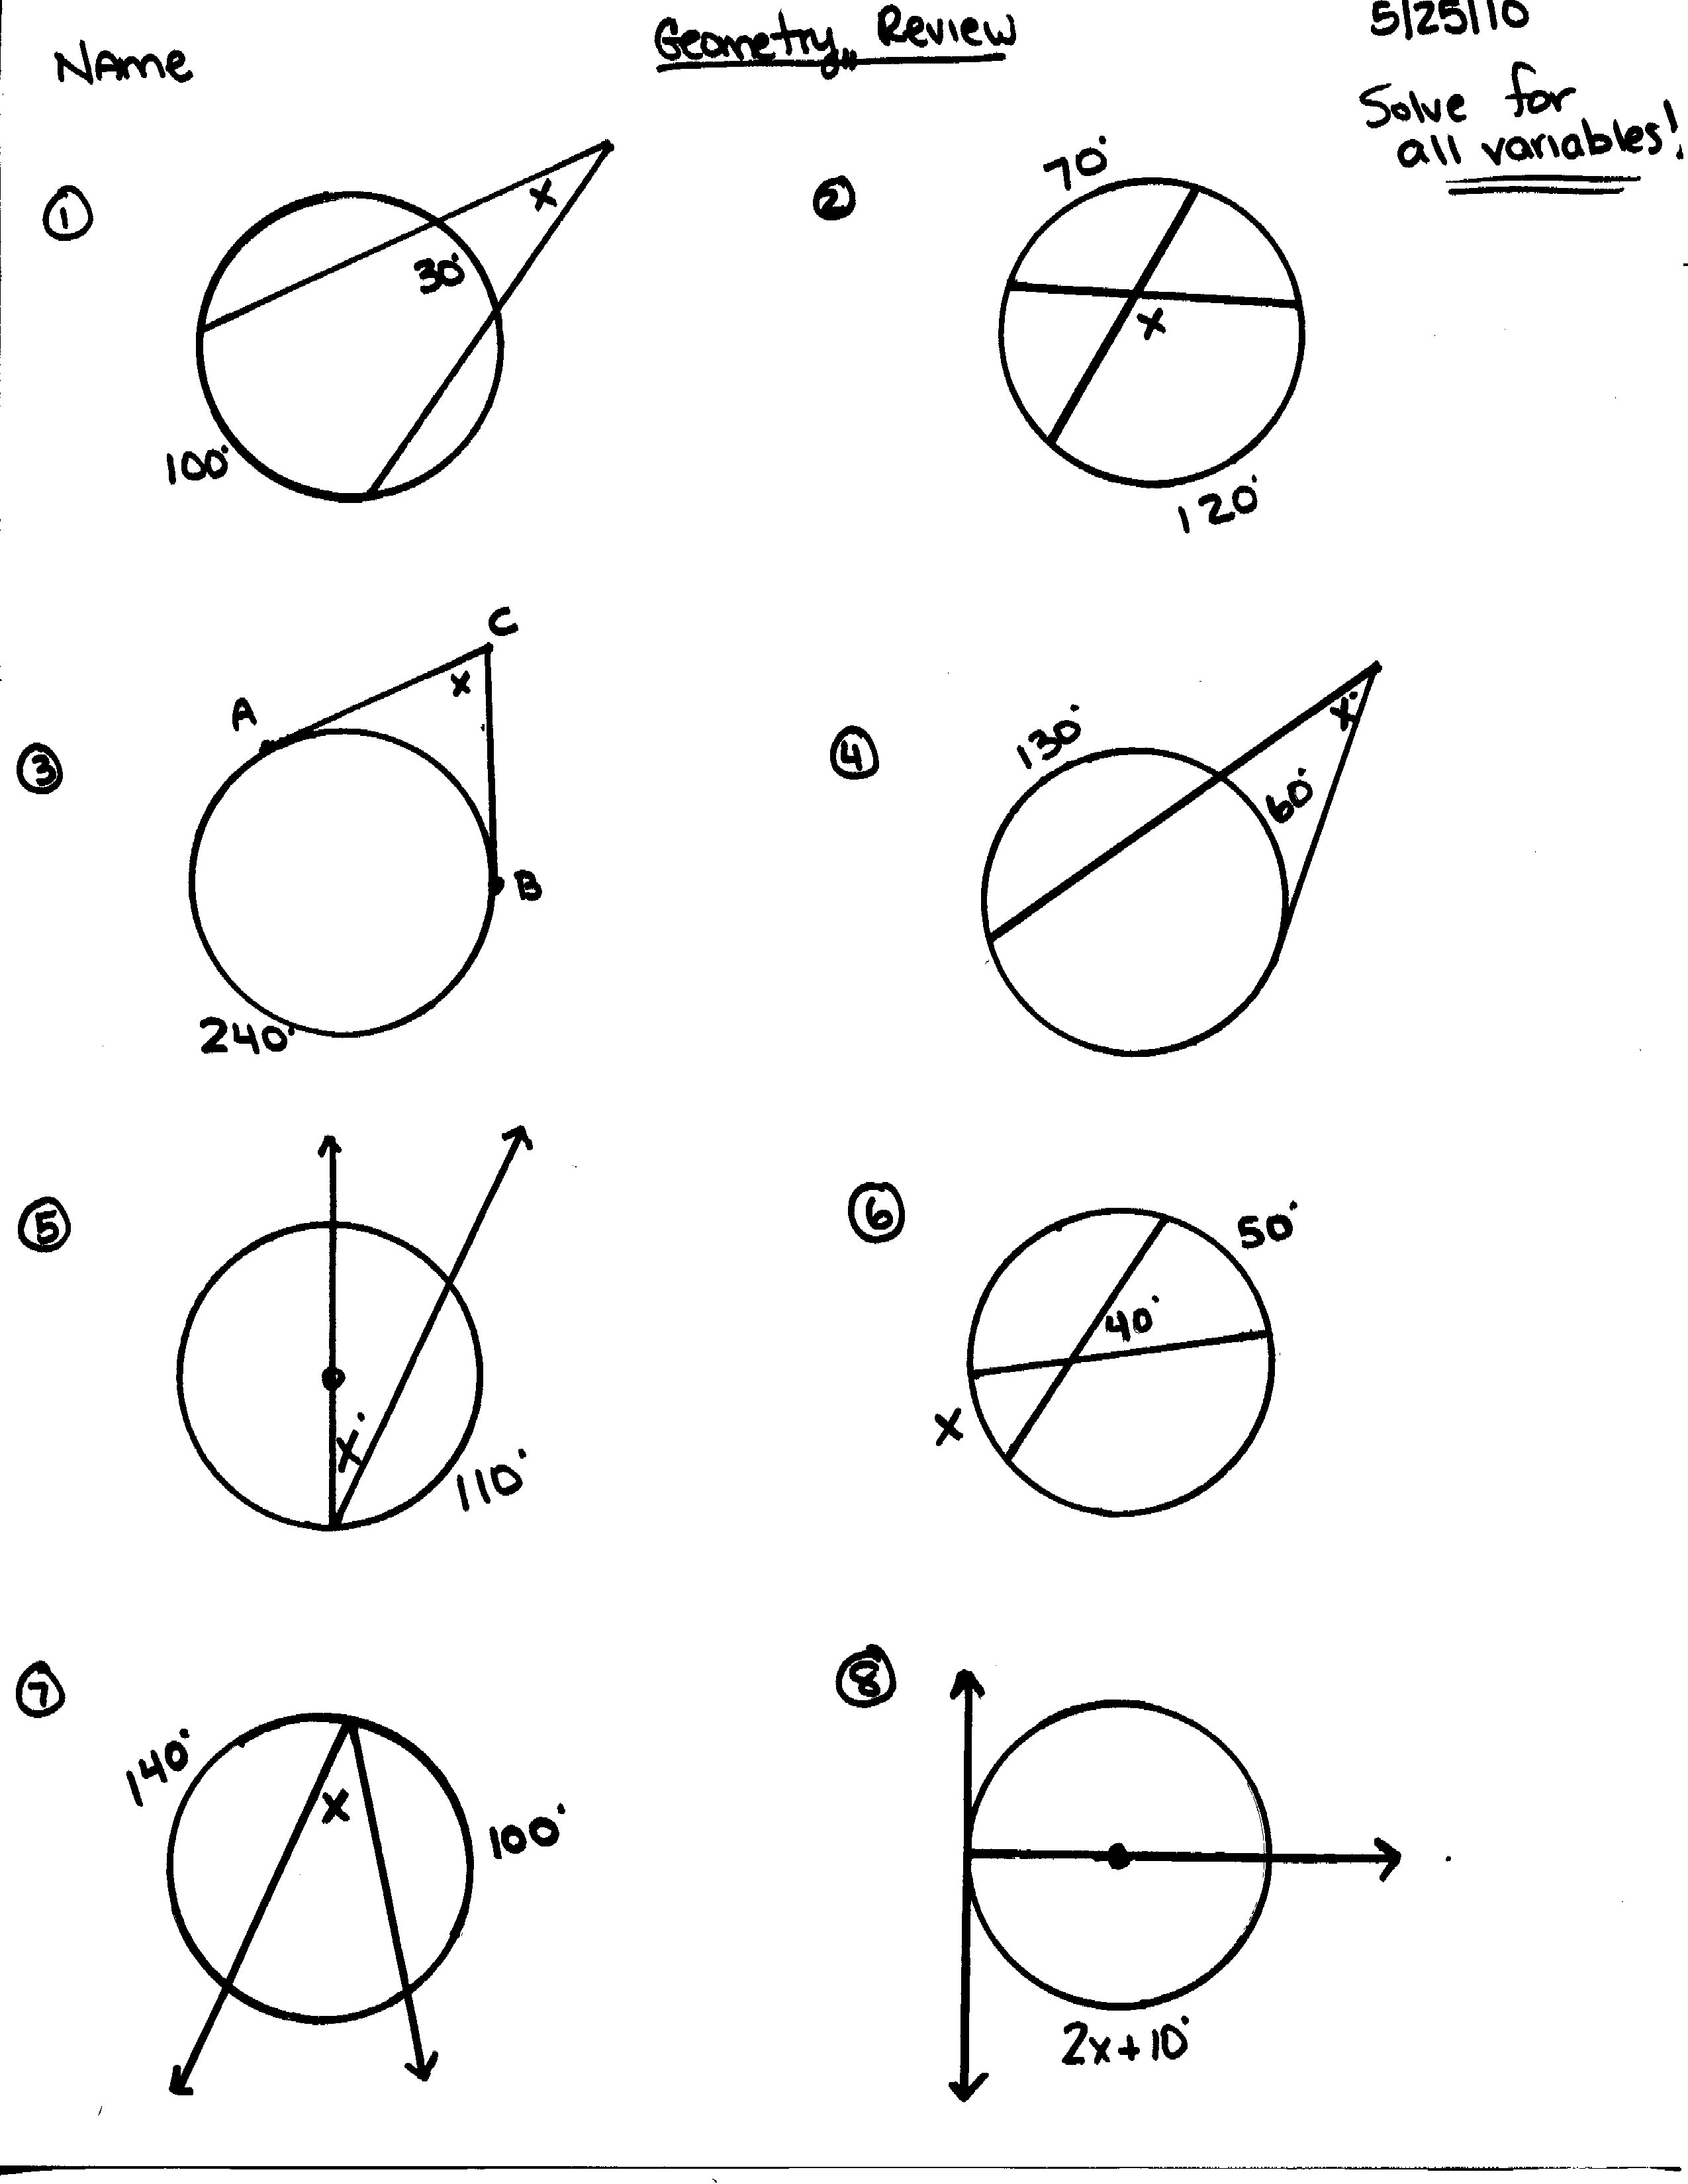 Circle Theorems Worksheet and Answers Image